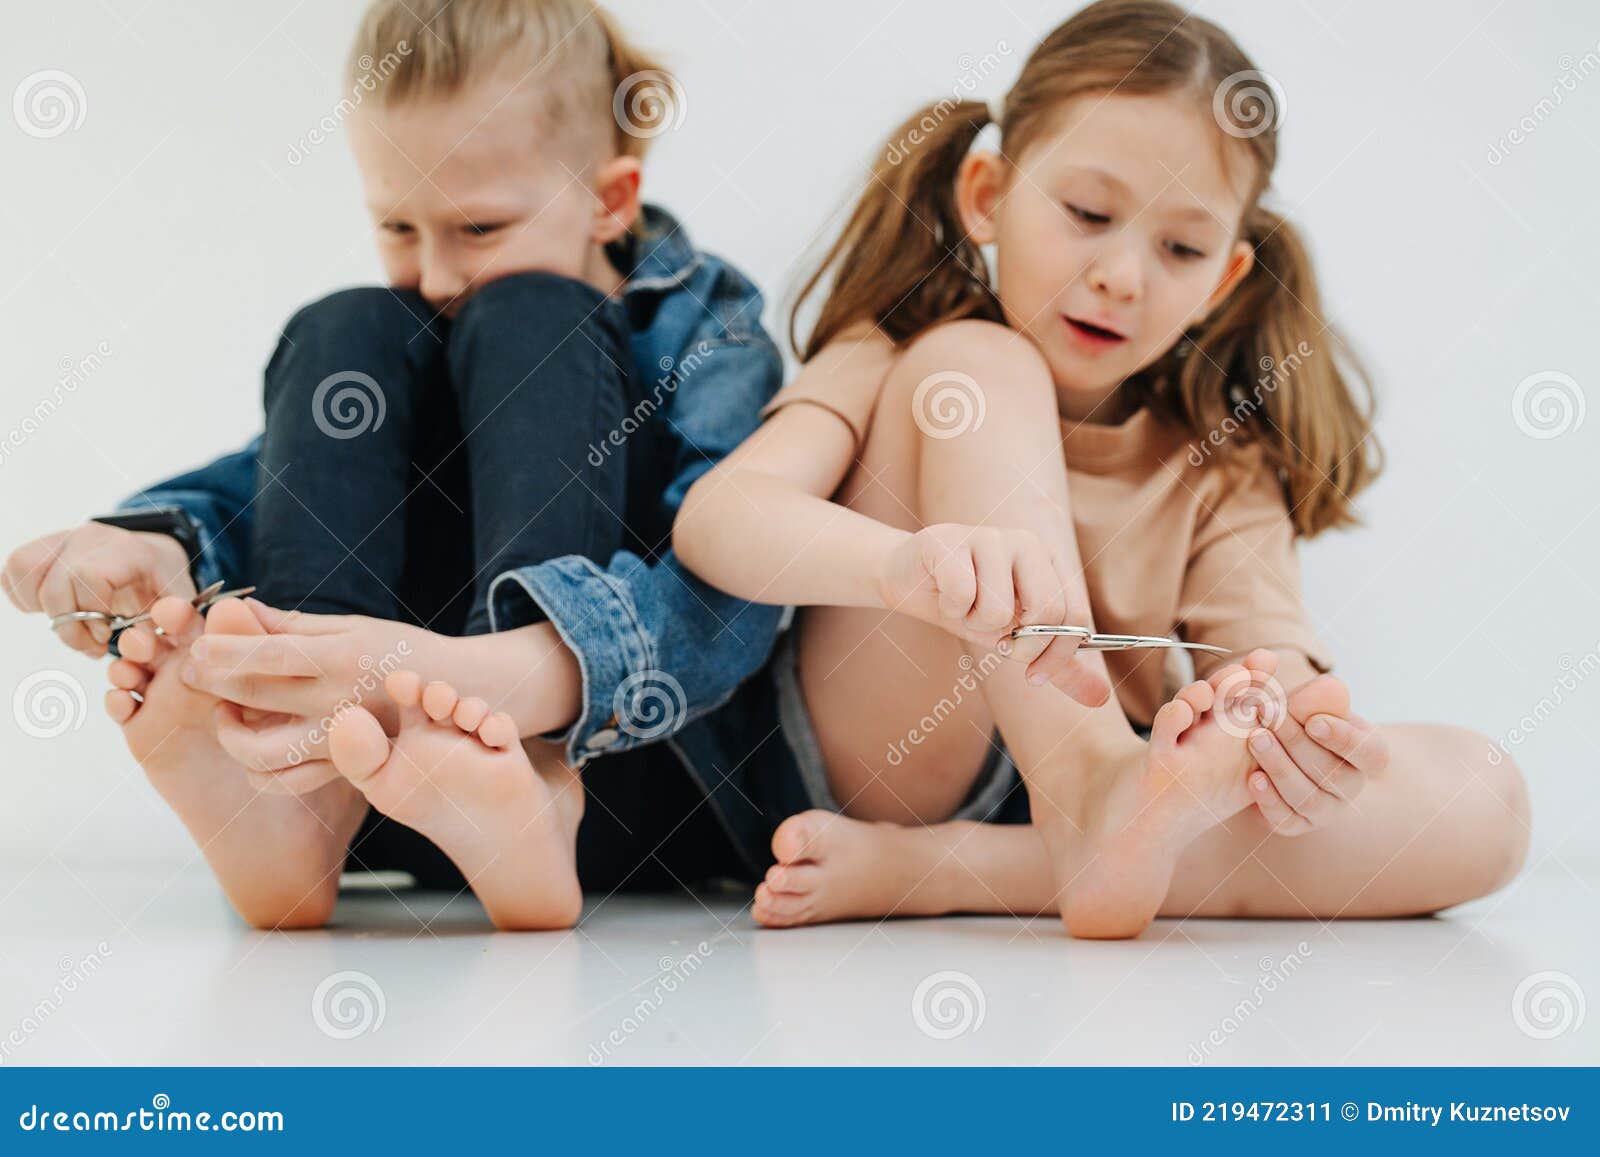 Funny Kids. Little Siblings with Bare Feet Clipping Nails on Their ...